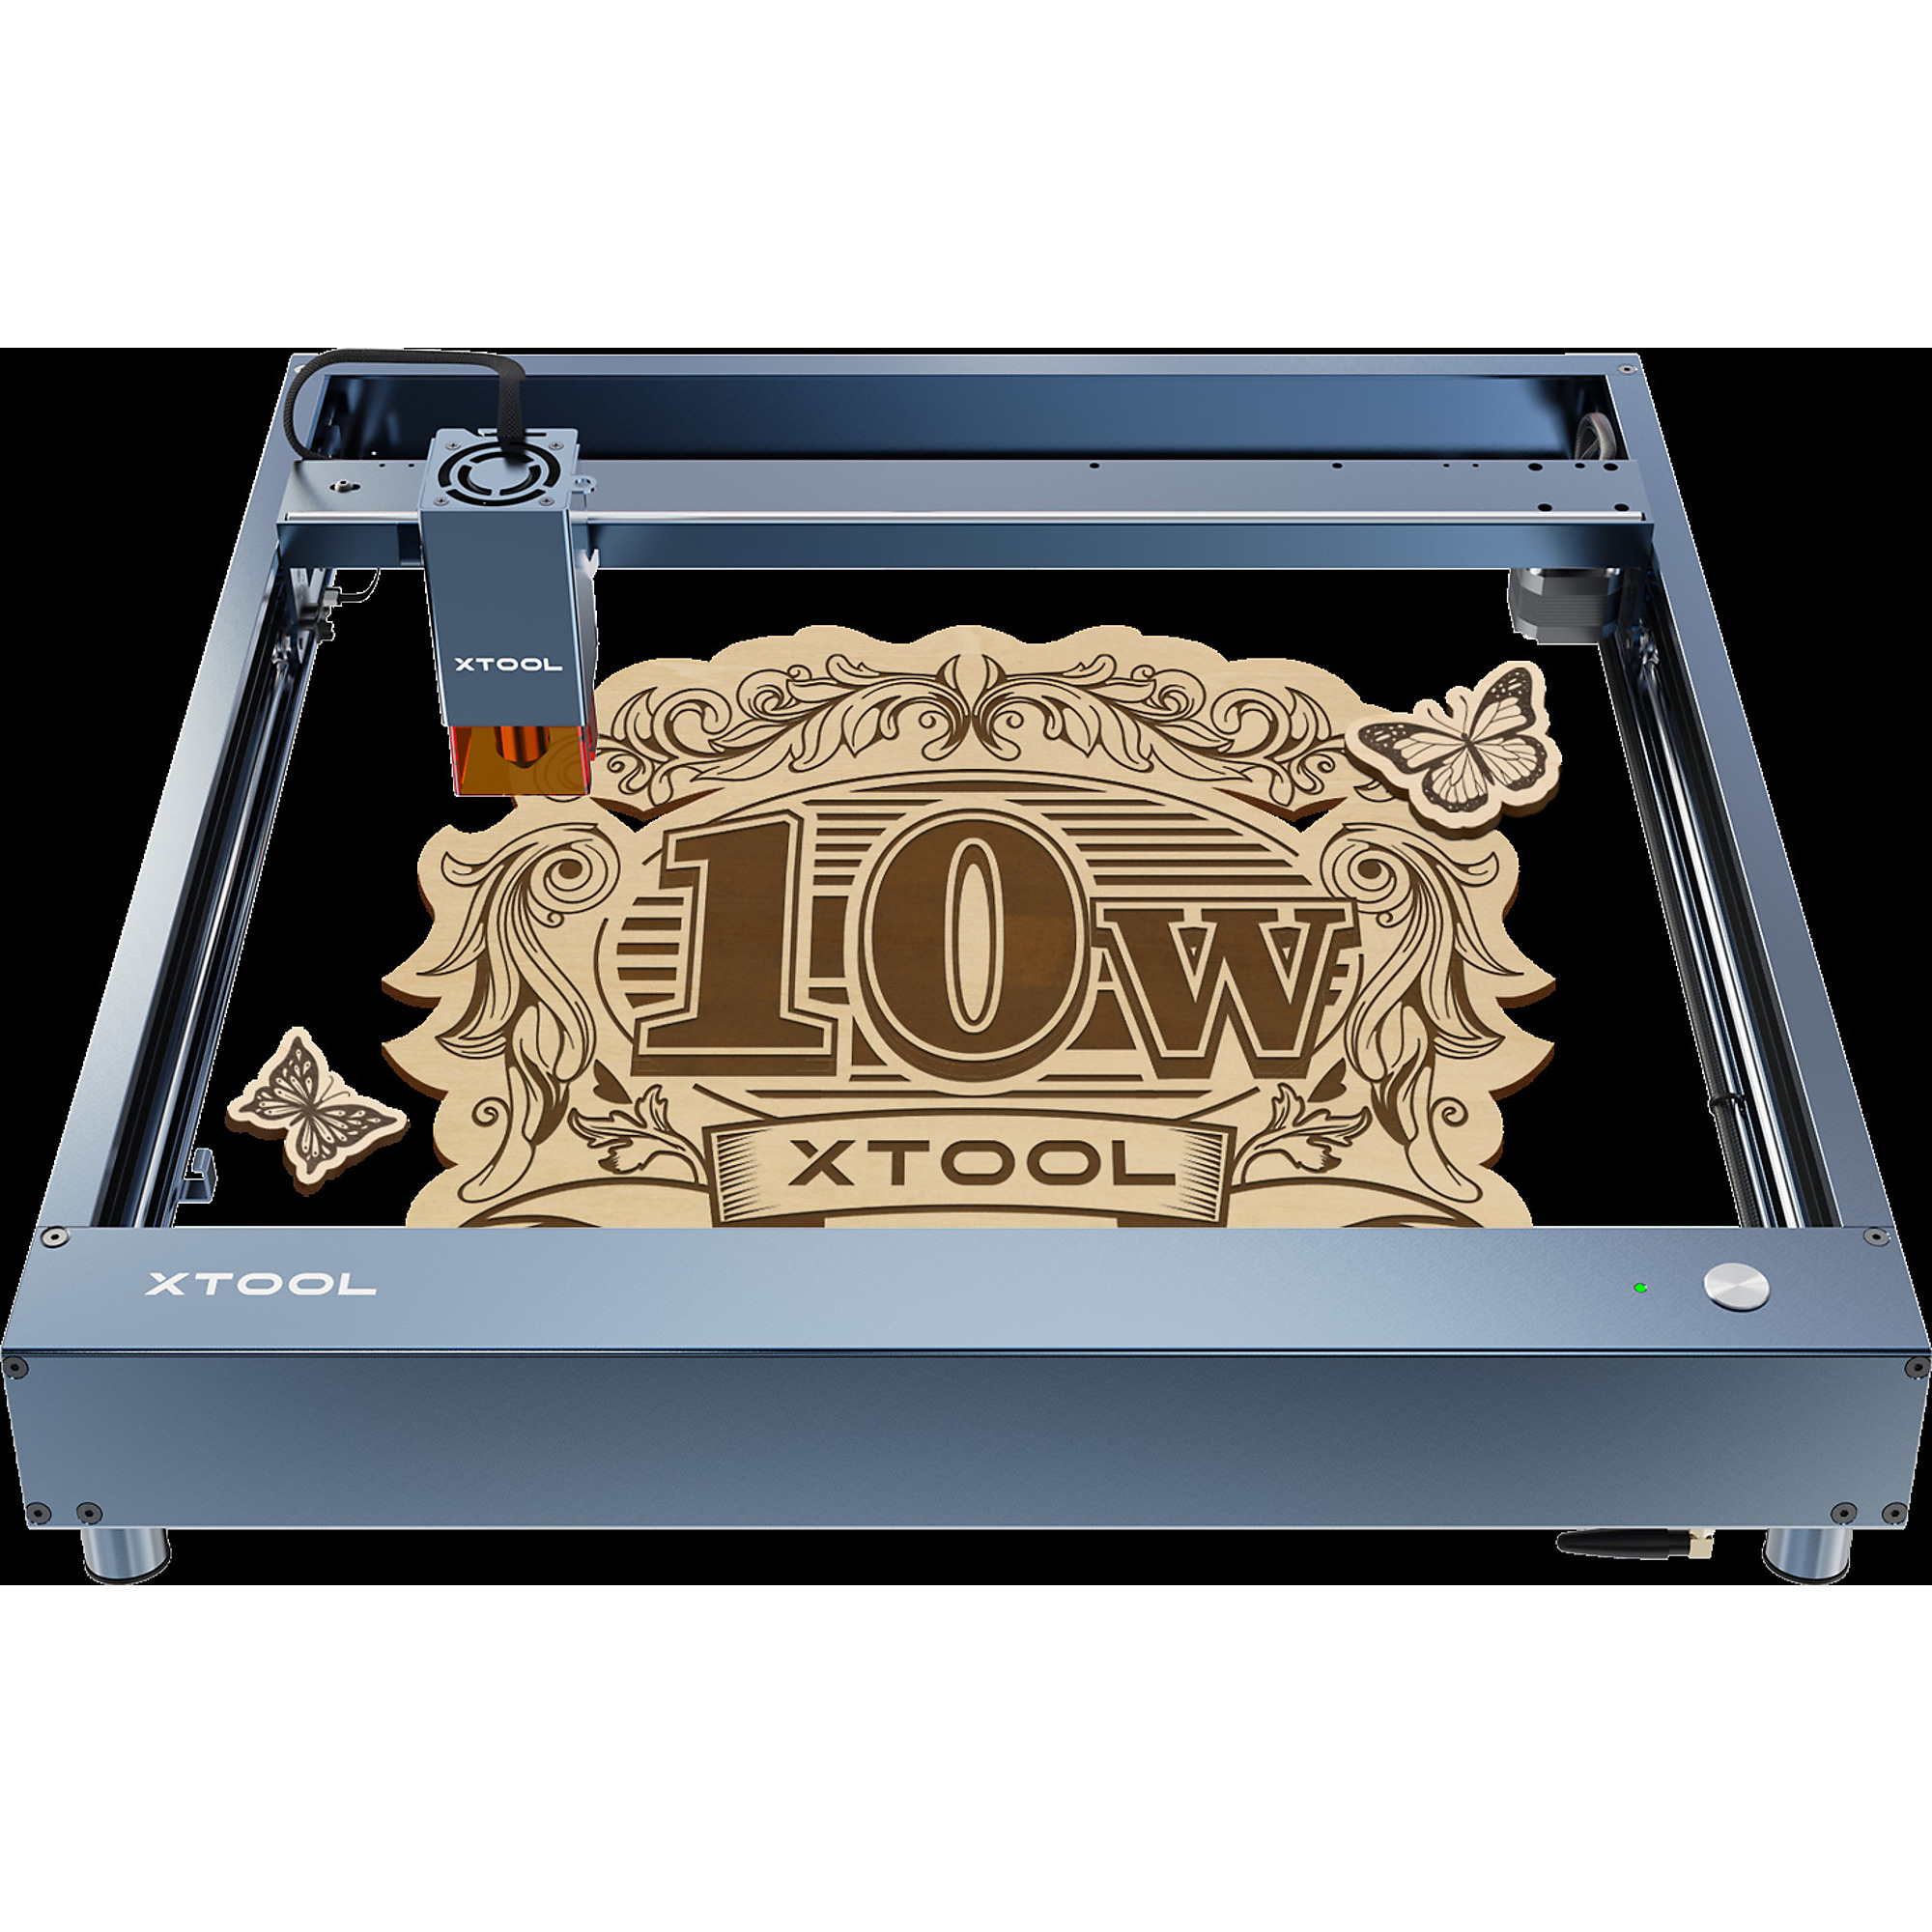 xTool, Laser Cutter and Engraver, 10w, 400mm/s, Model, Working Width 14.57 in, Working Length 31.89 in, Laser Power 10 W, Model P1030253